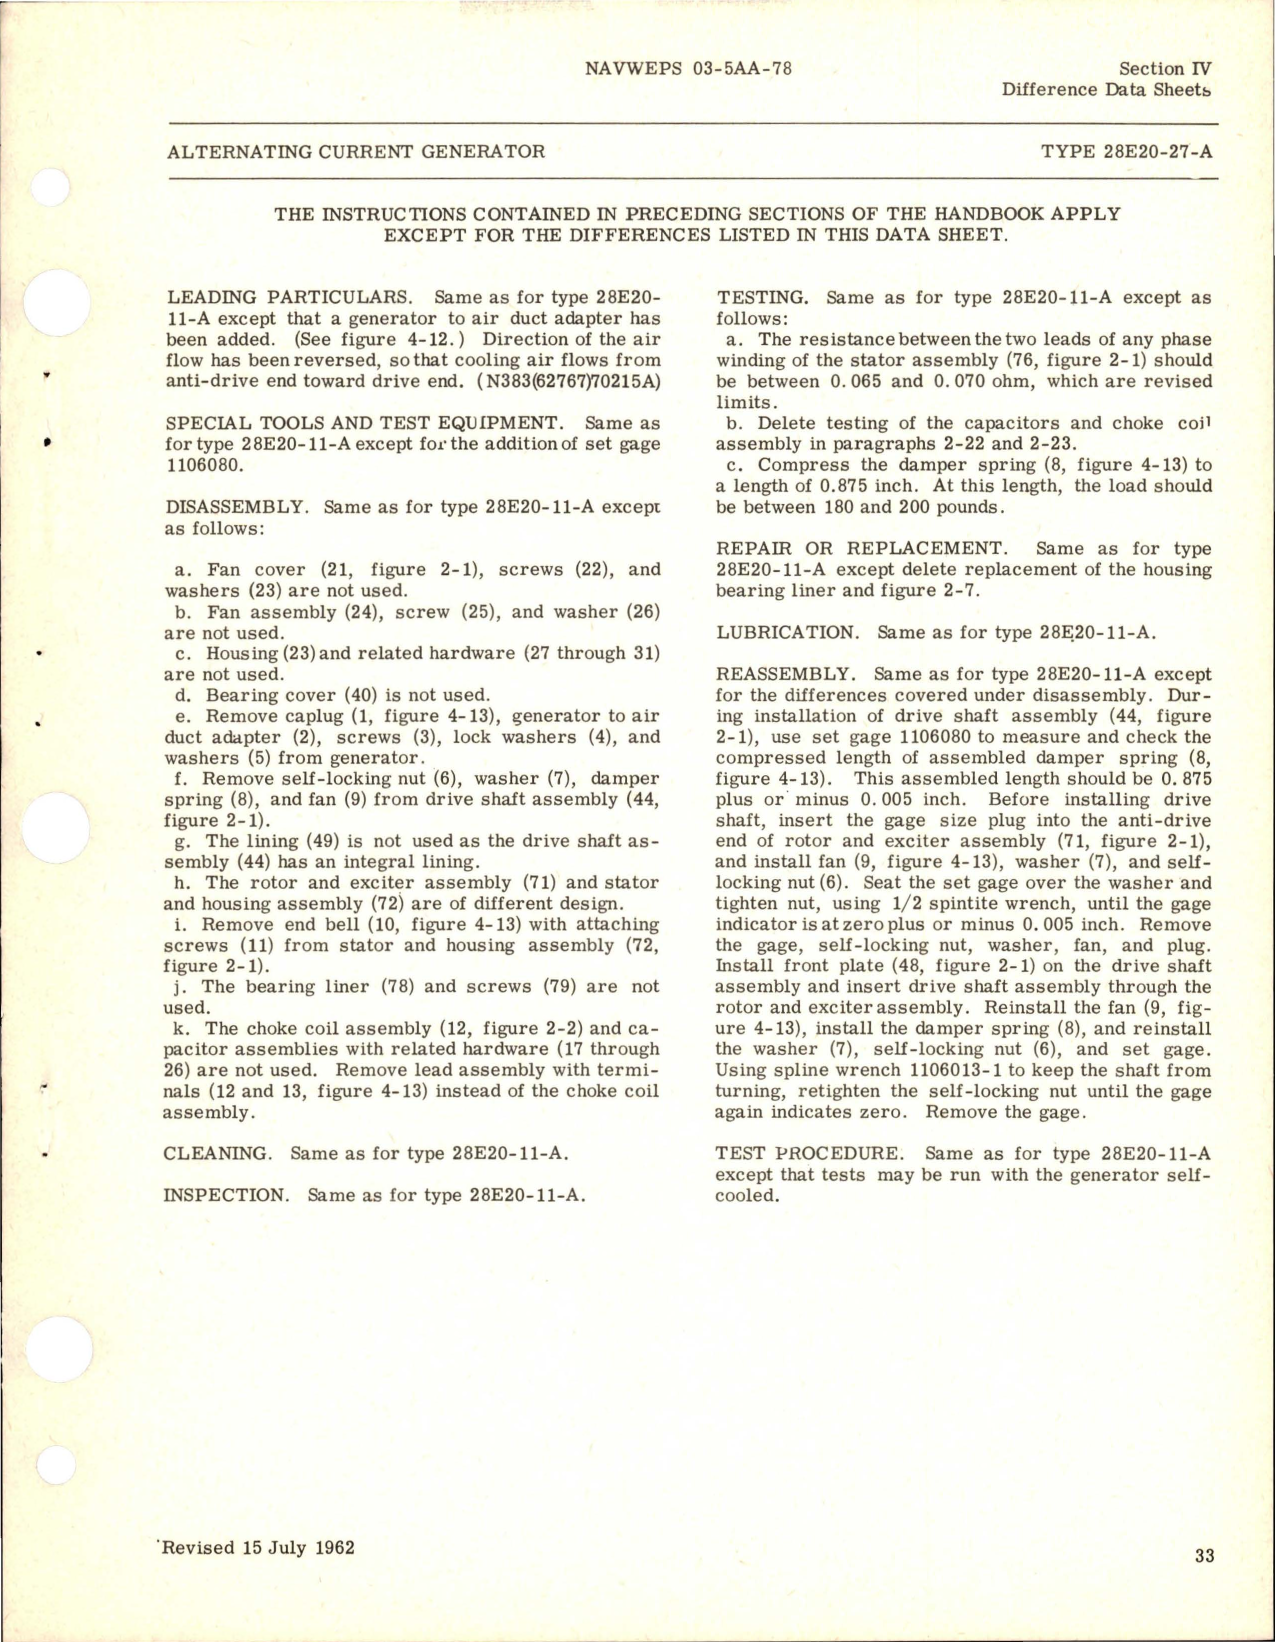 Sample page 5 from AirCorps Library document: Overhaul Instructions for Alternating Current Generator - 